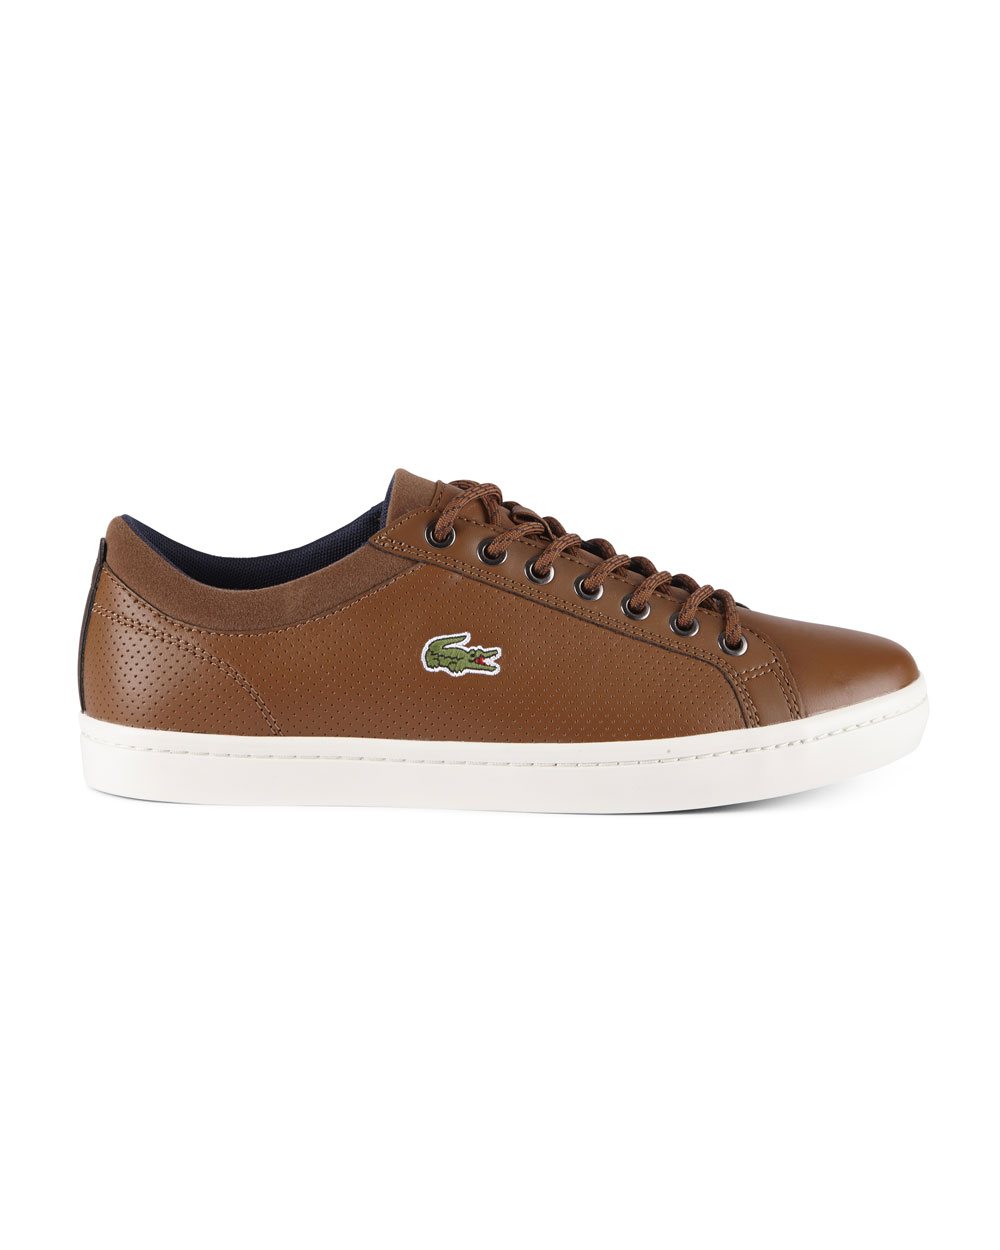 Lacoste Straightset SP317 1 CAM (brown)